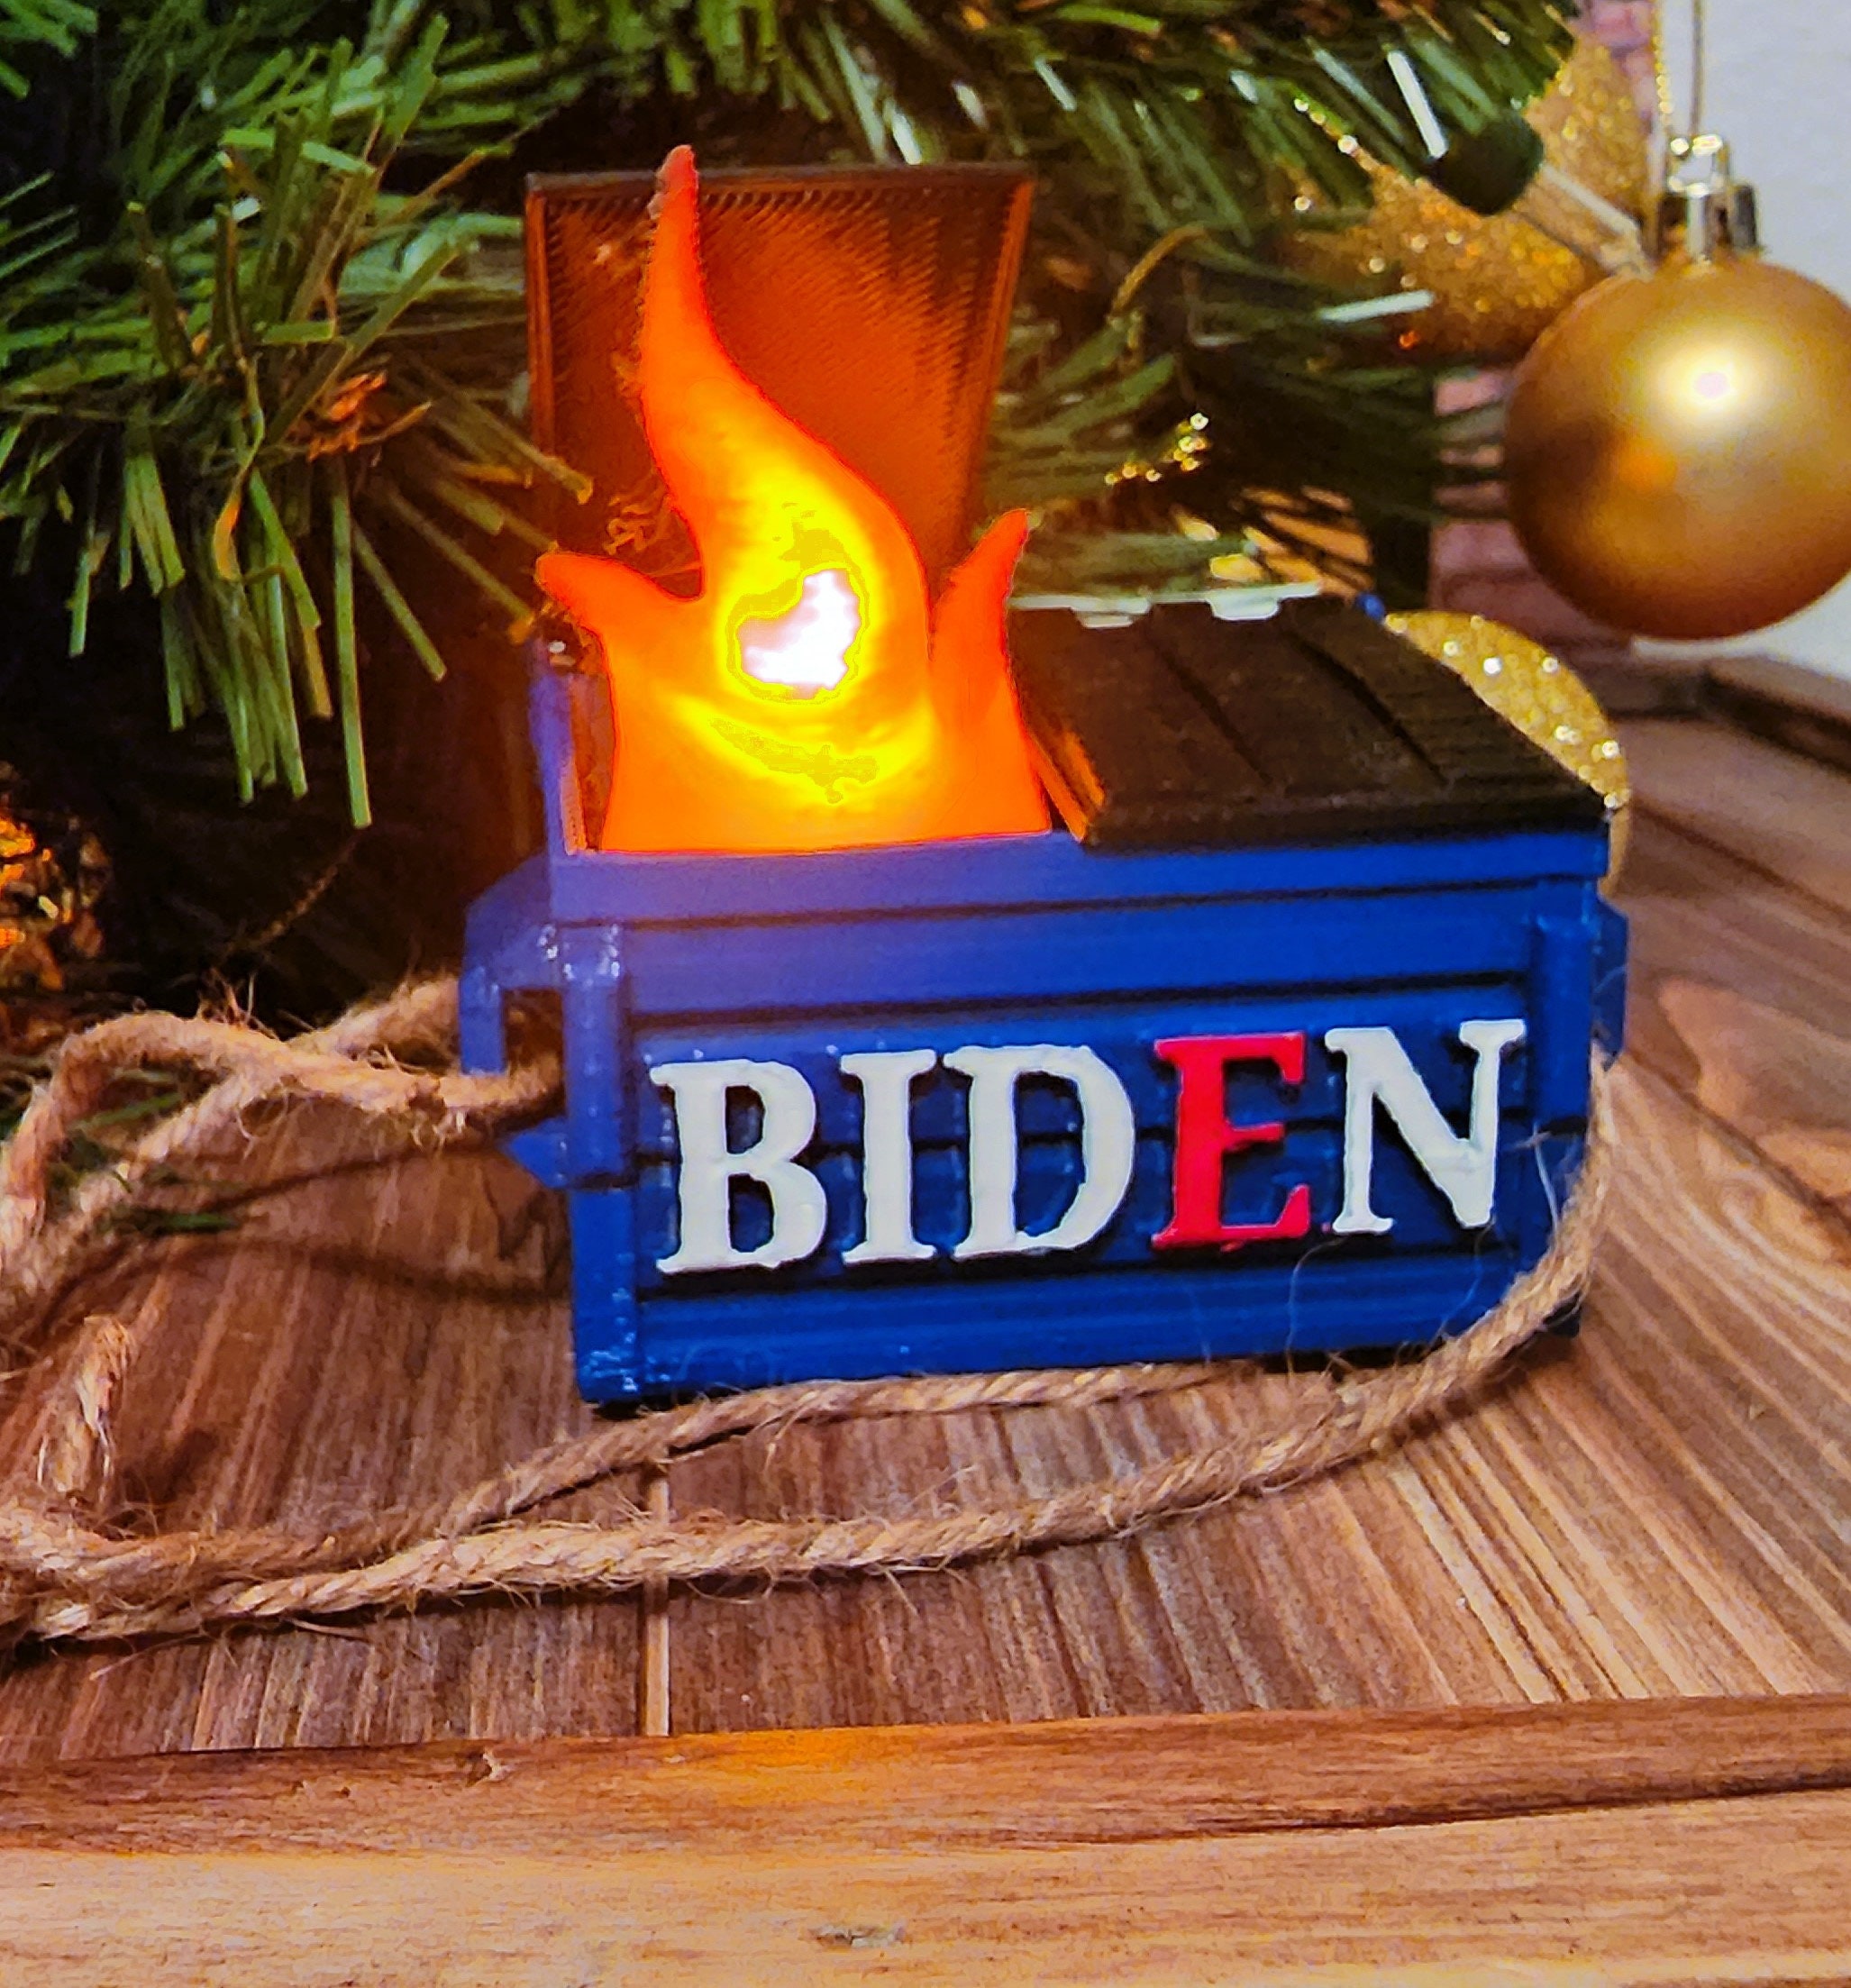 Biden Toilet Light Projector, Joe Biden Toilet Target Light Projector 2.0  with High Definition Funny Democratic Images, Best Gag Gifts for Adults